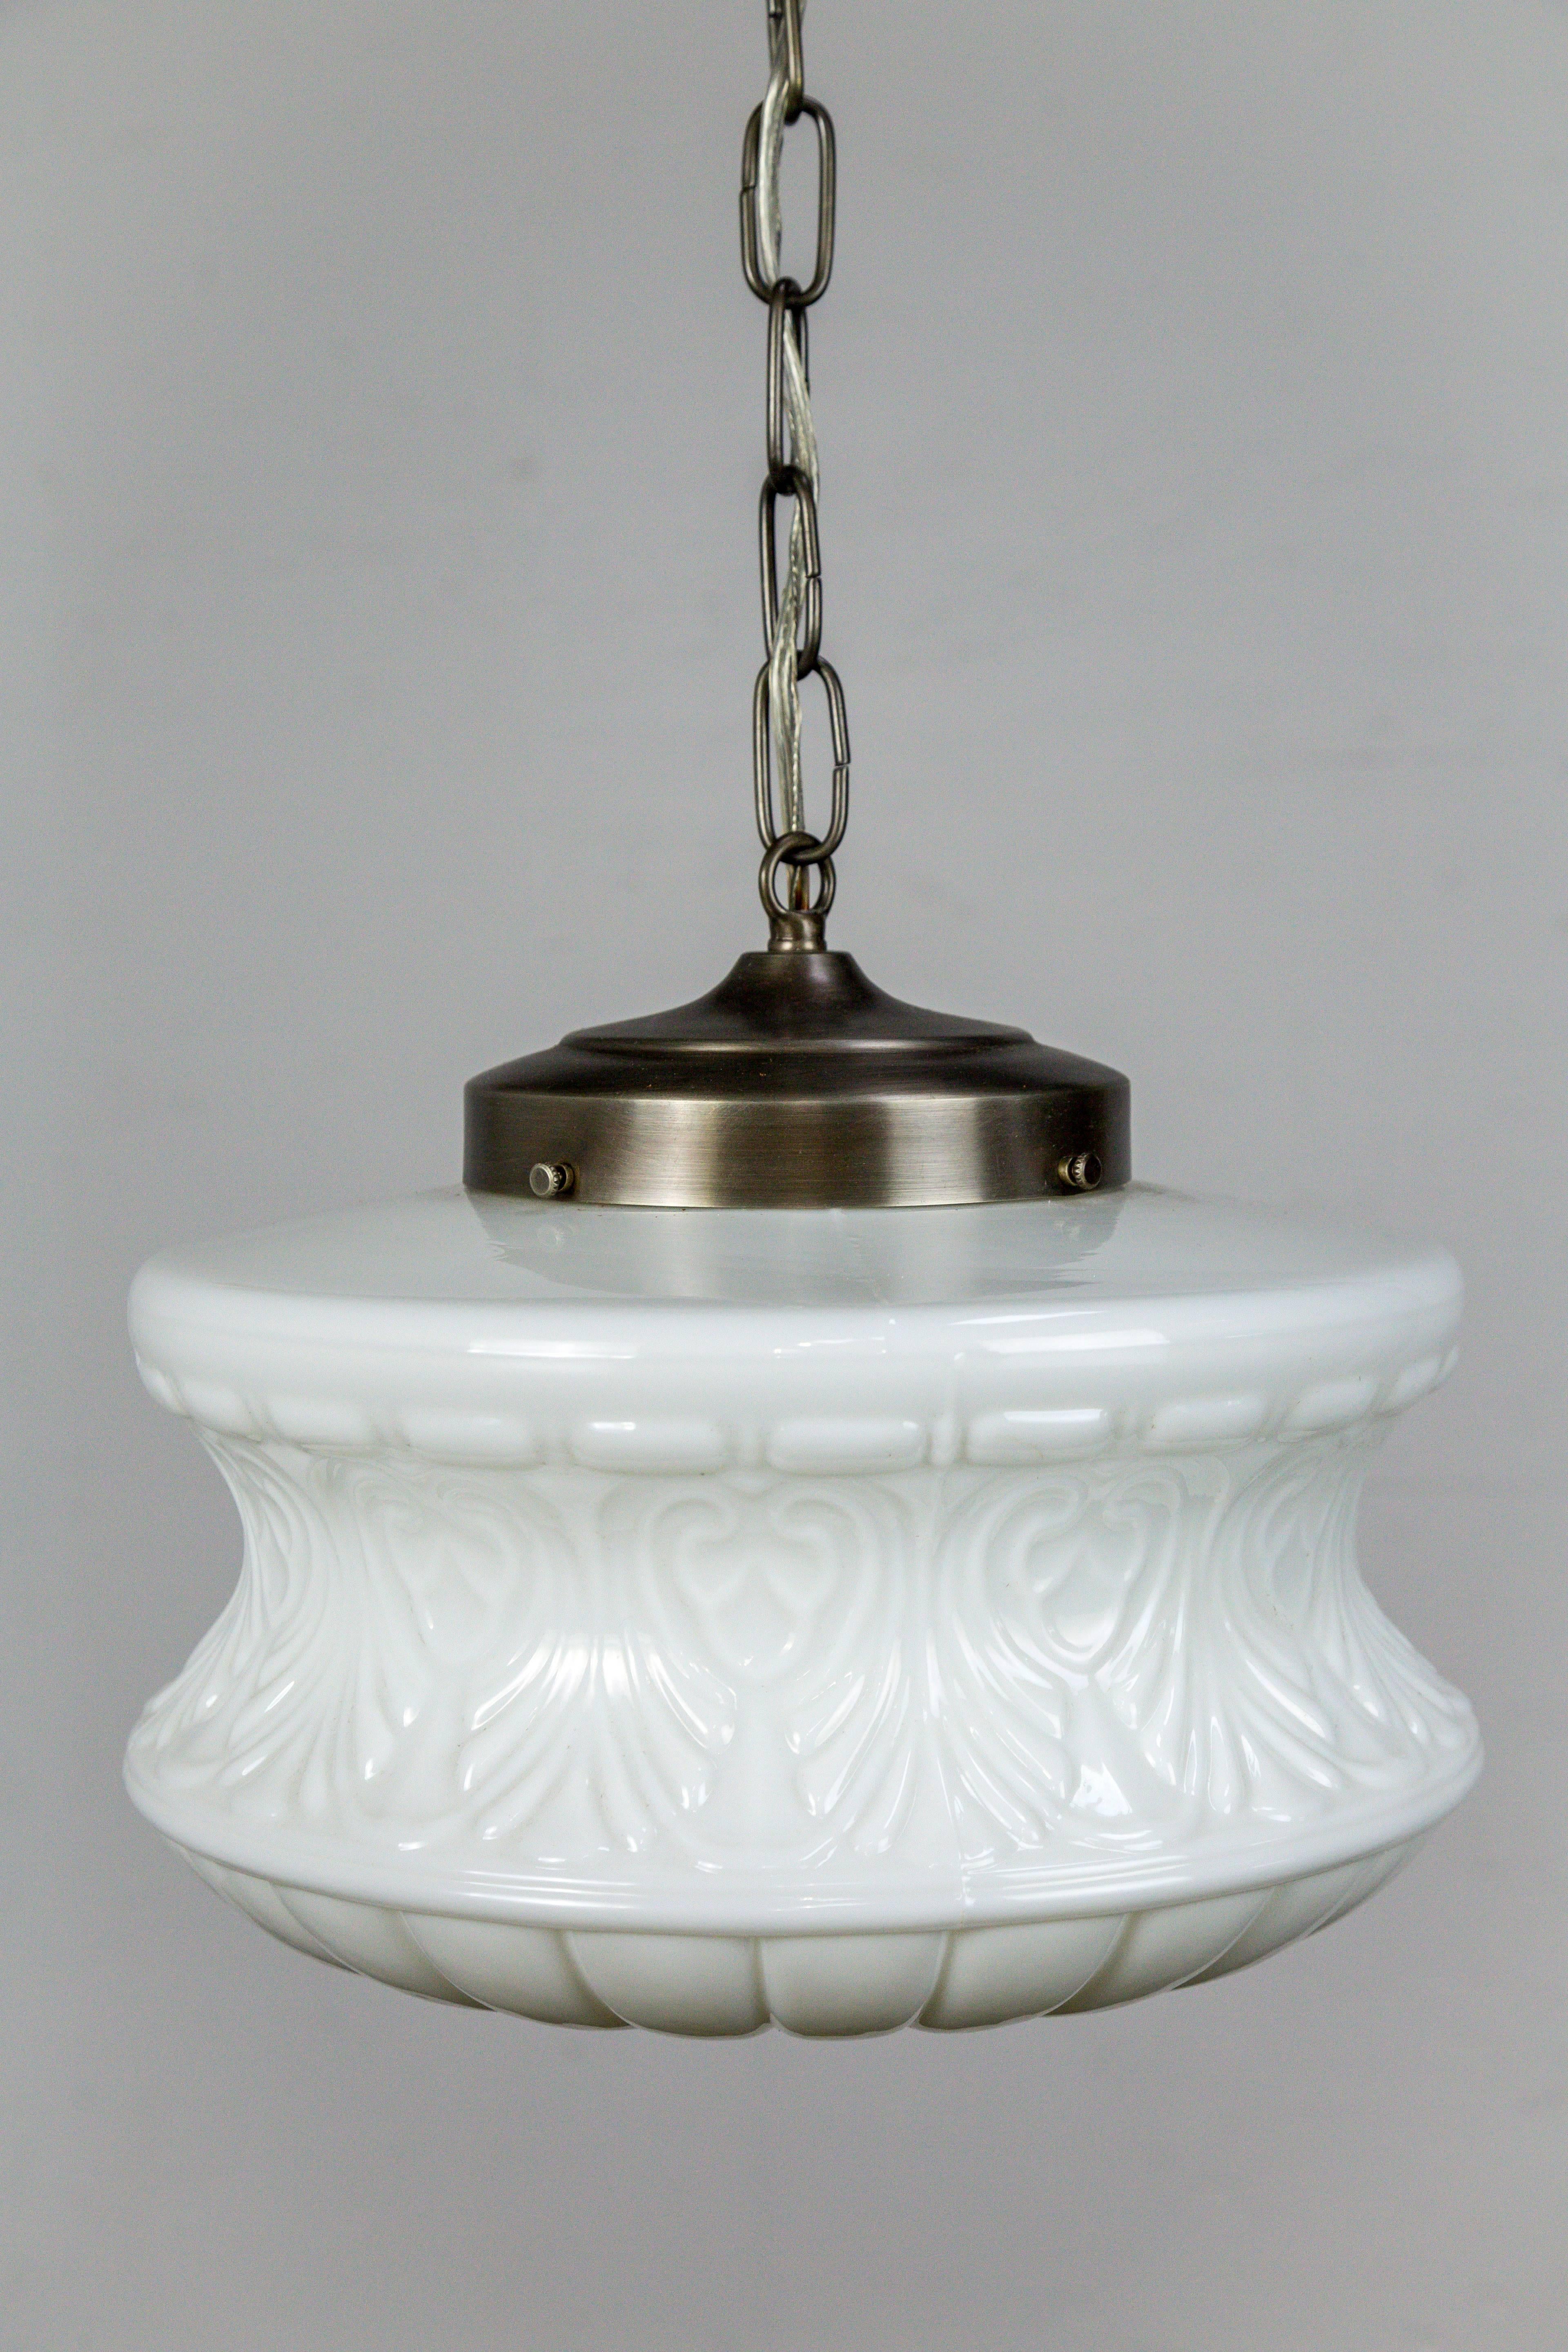 This antique, molded milk glass has a beautiful shape with an acorn and palmette motif. It has been fashioned with a new, brushed nickel tinted brass shade holder, chain, and canopy. The canopy has a lovely floral shape that compliments the design